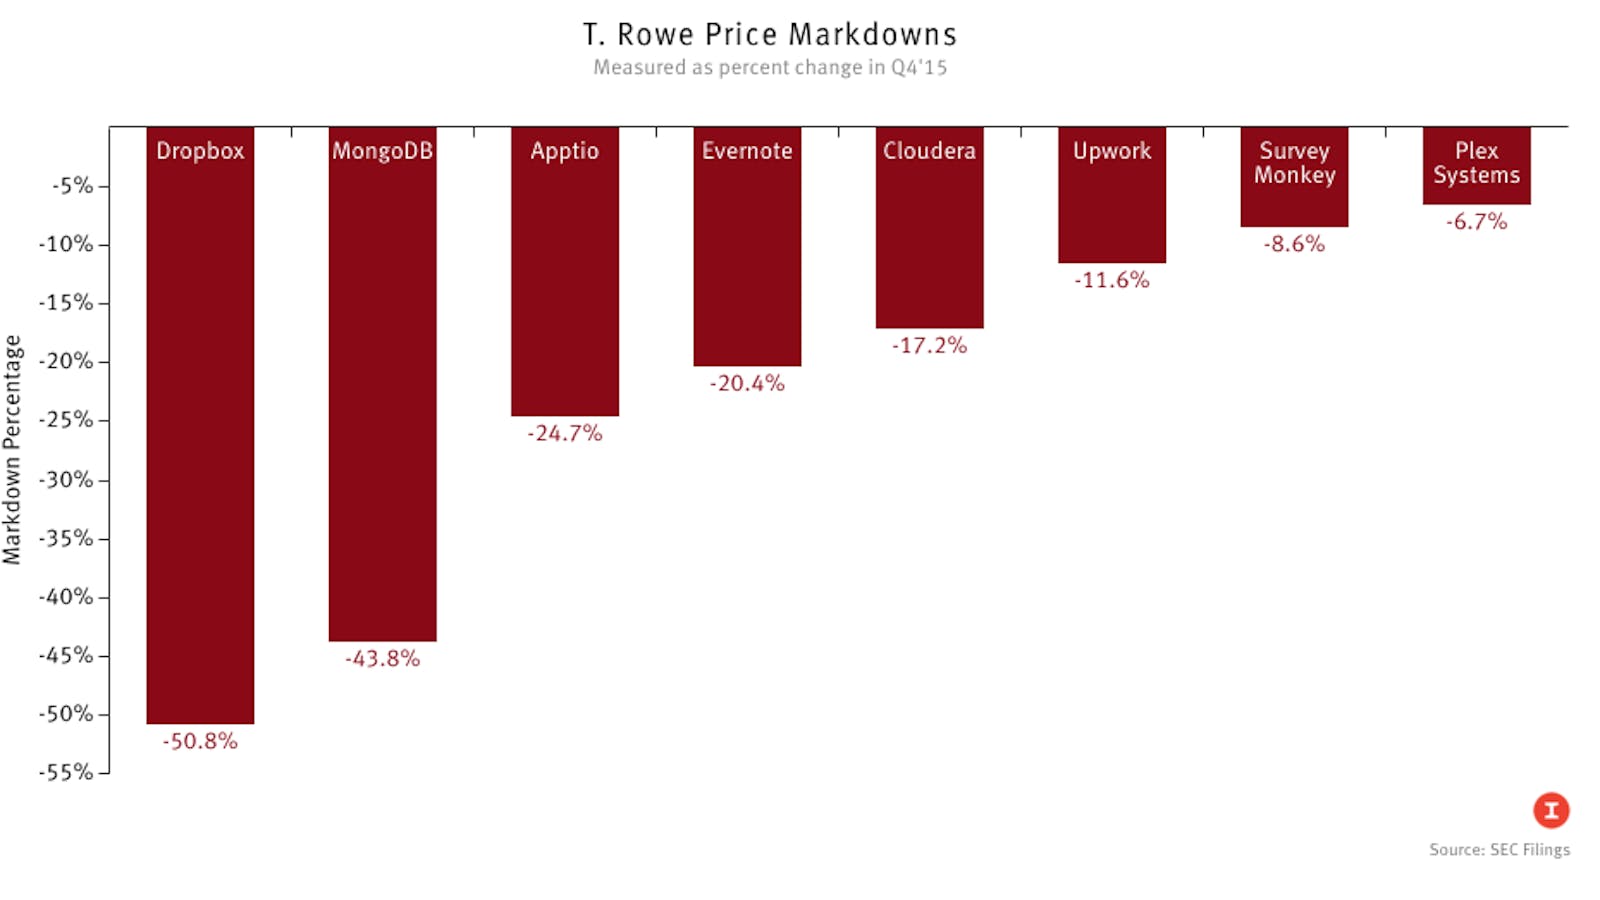 Source: SEC Filings; T. Rowe Price portfolio holdings reports. Graphic by Peter Schulz.